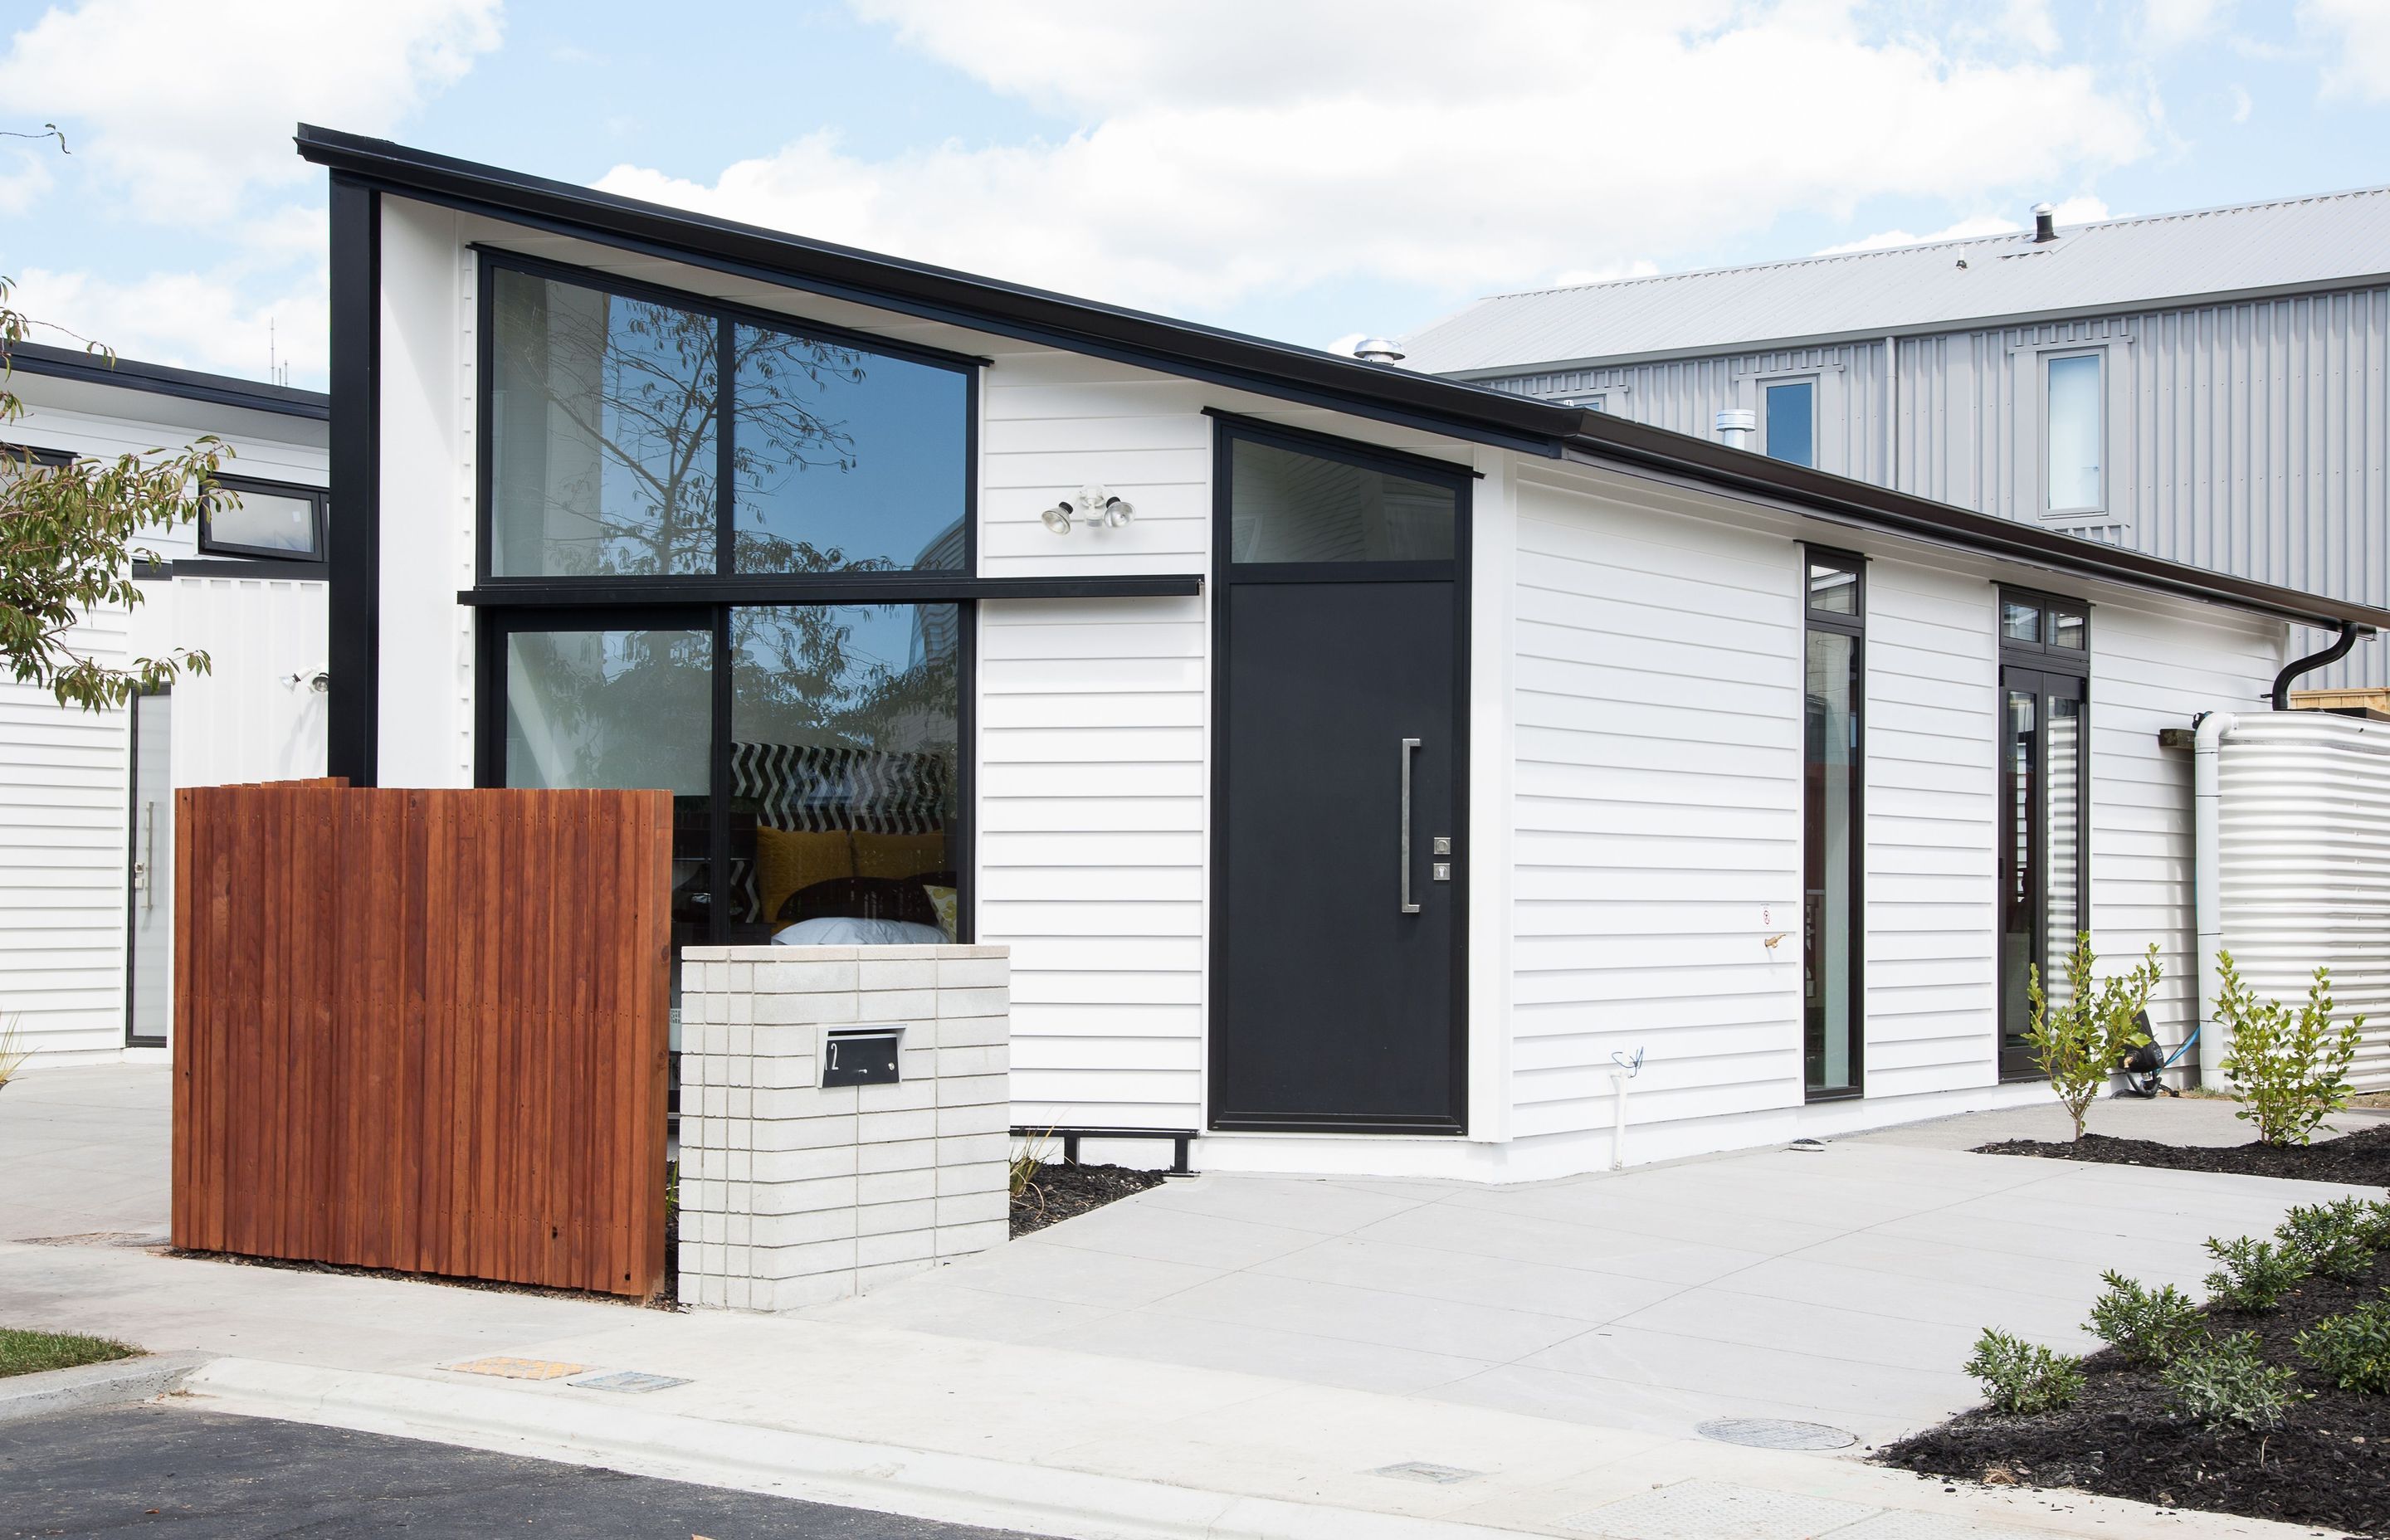 Good design is a selling point for the small but efficiently organised, mid-price Axis Series homes at Hobsonville Point, Auckland, by Architecture Workshop.